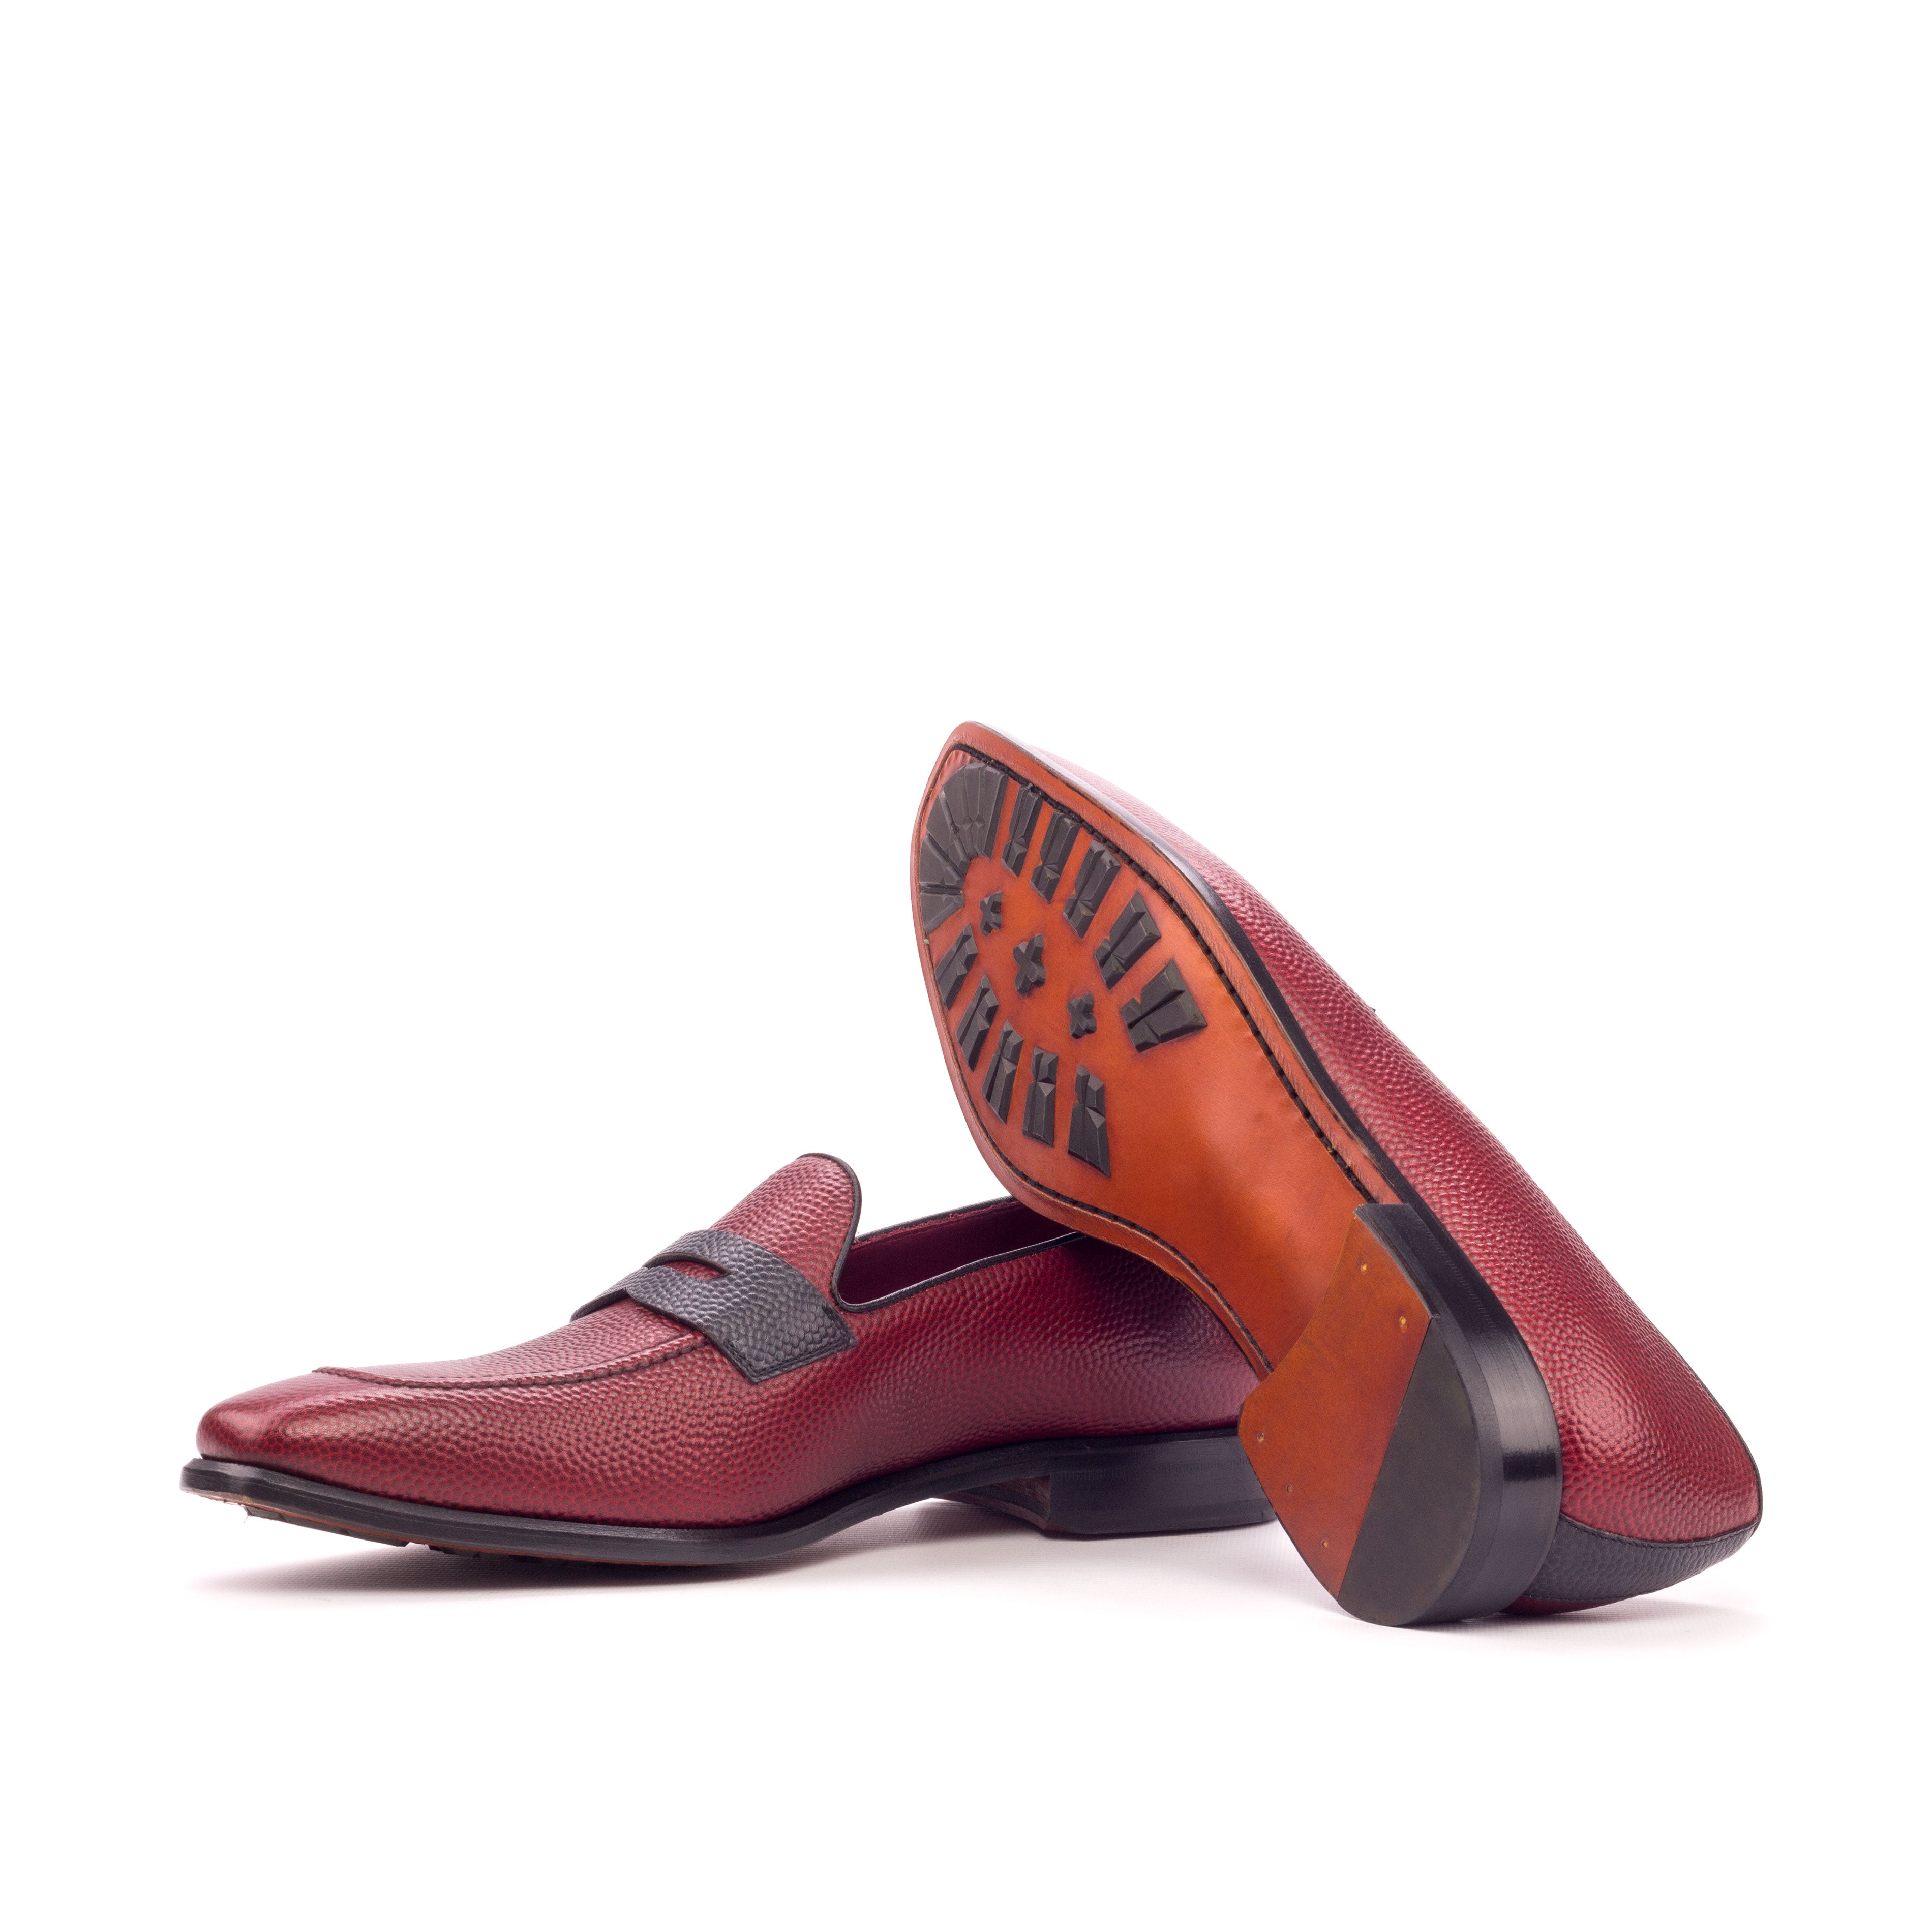 Red Pebble Grain Leather Loafer